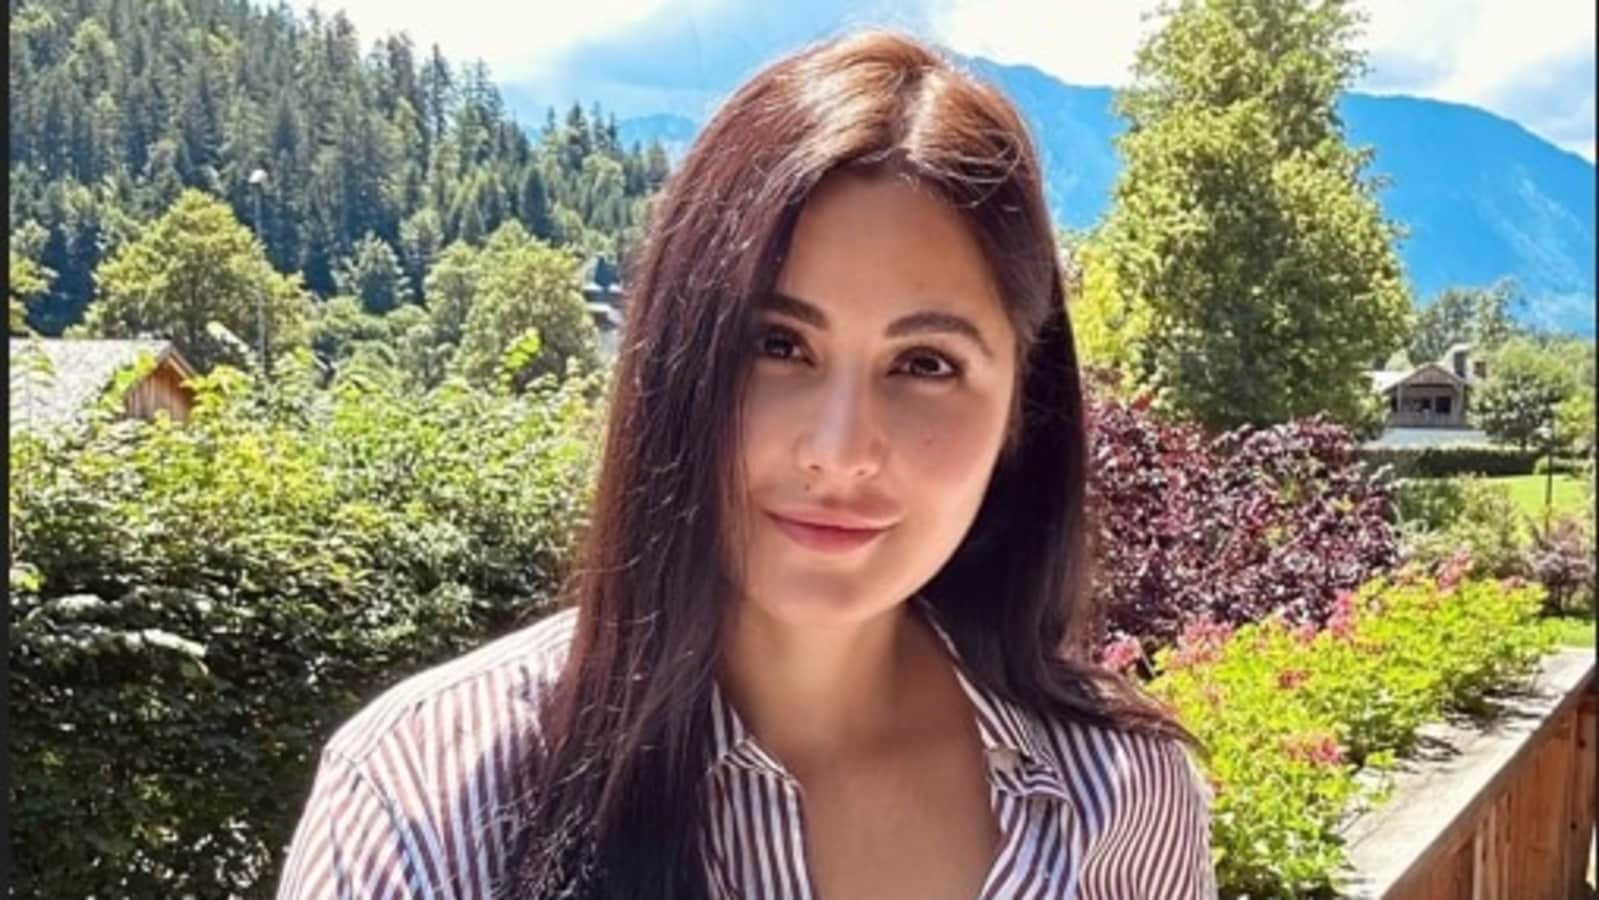 Katrina Kaif’s nutritionist reveals her diet secrets: How many, what kind of meals does she have everyday? | Health